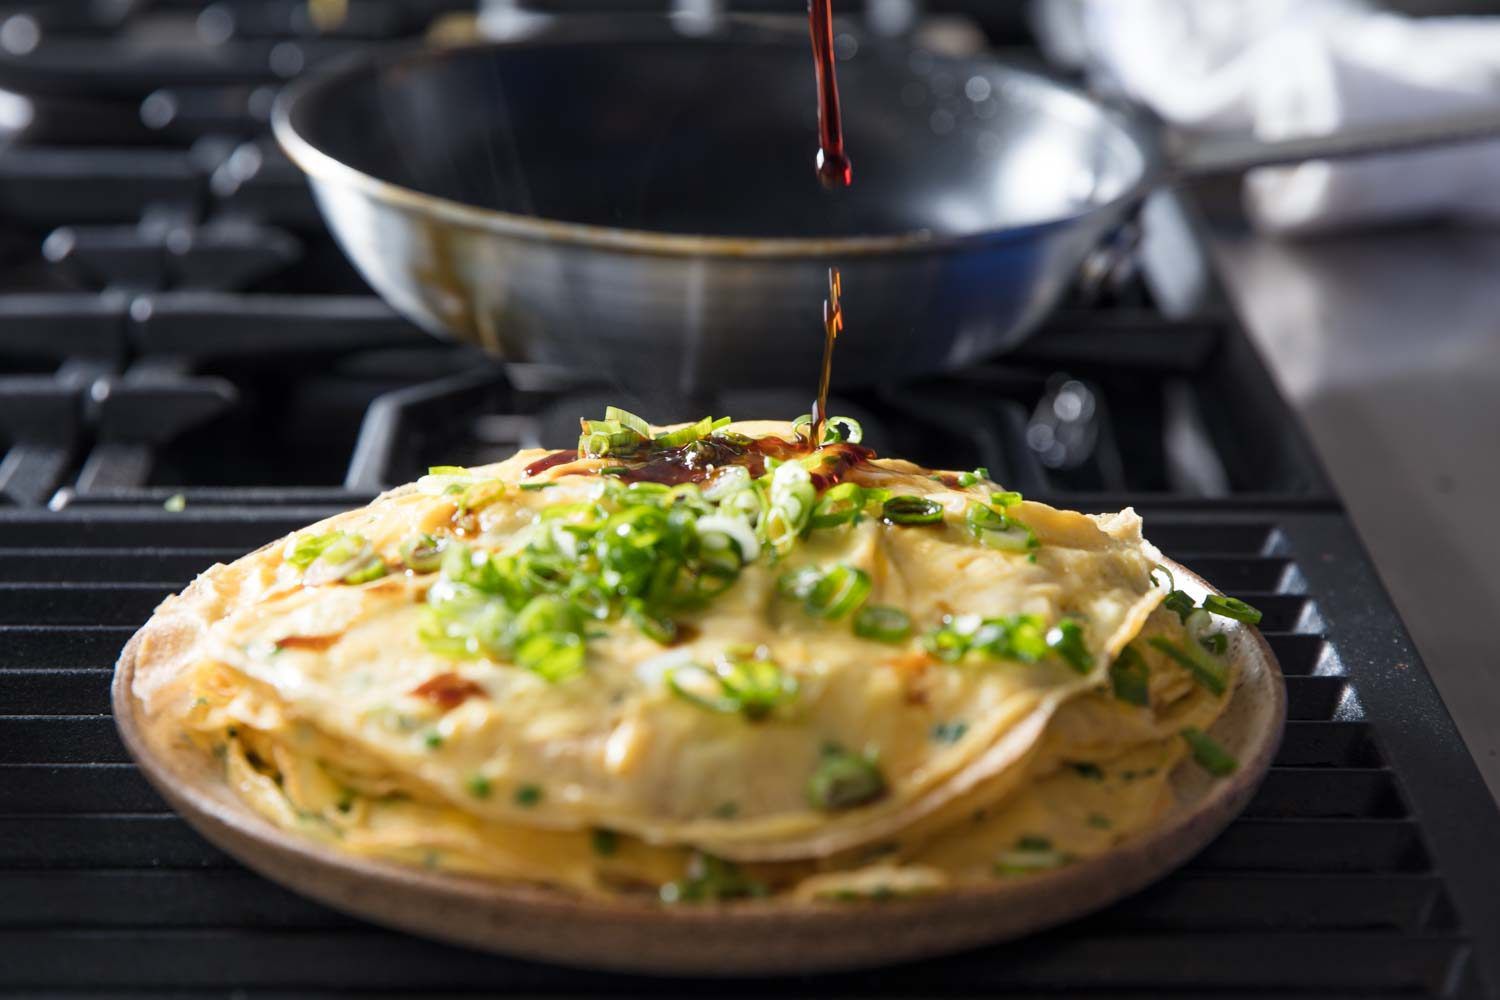 Soy sauce being drizzled over layered omelette.